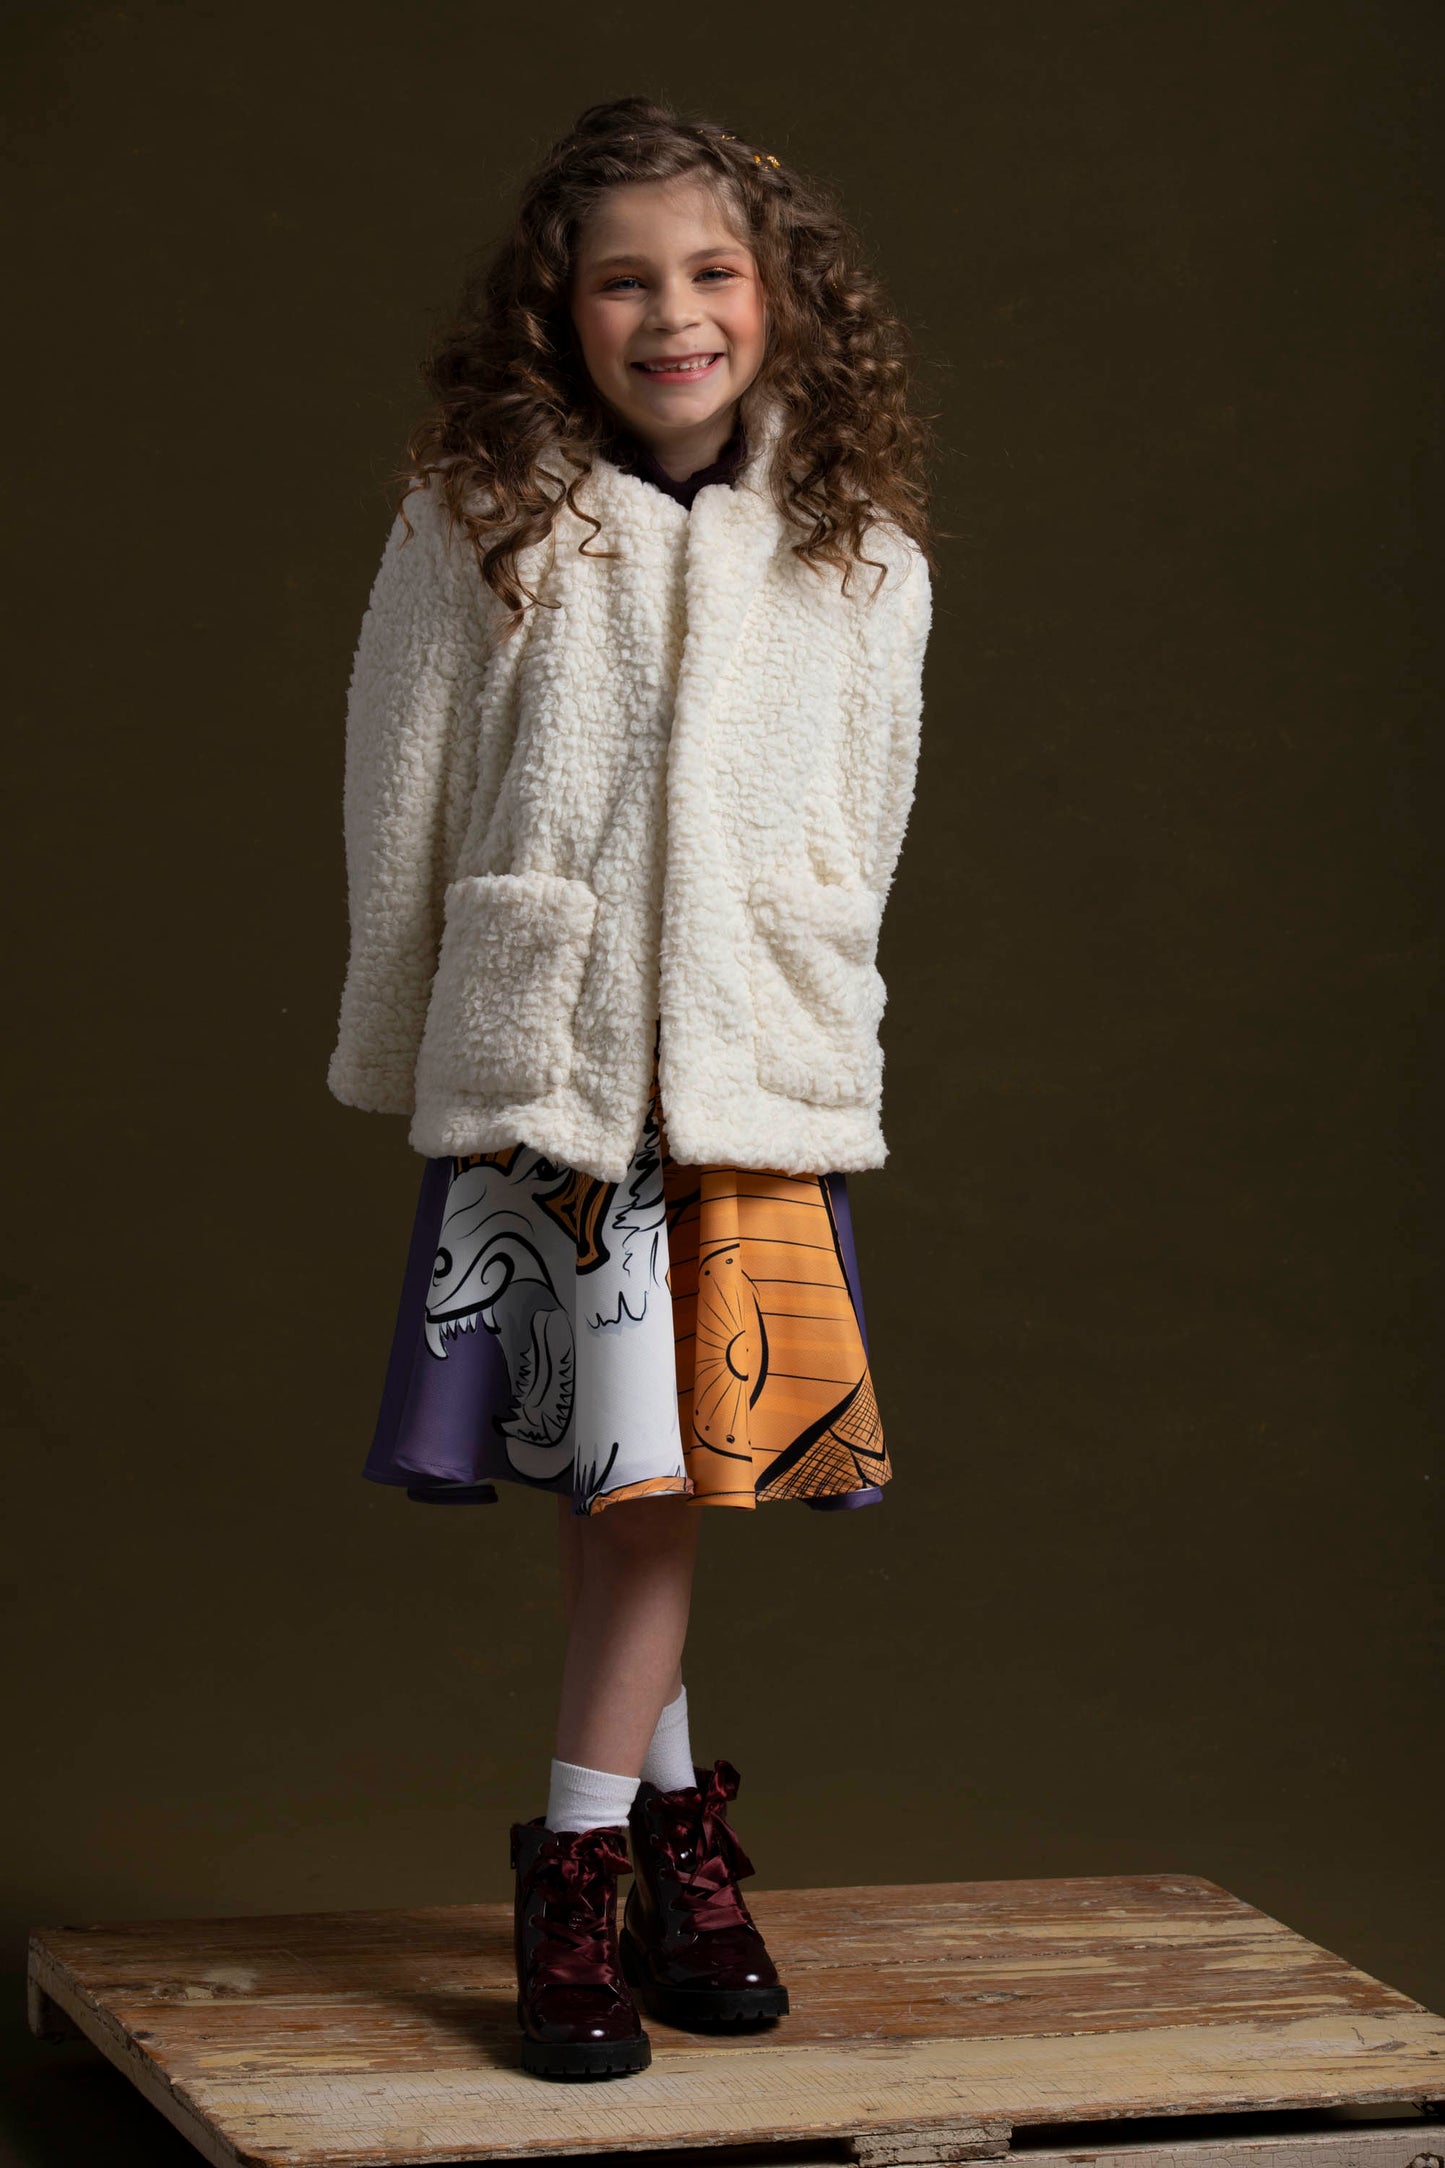 Paired with the lorek skirt and purple knit tunic, she sports her fluffy northern jacket